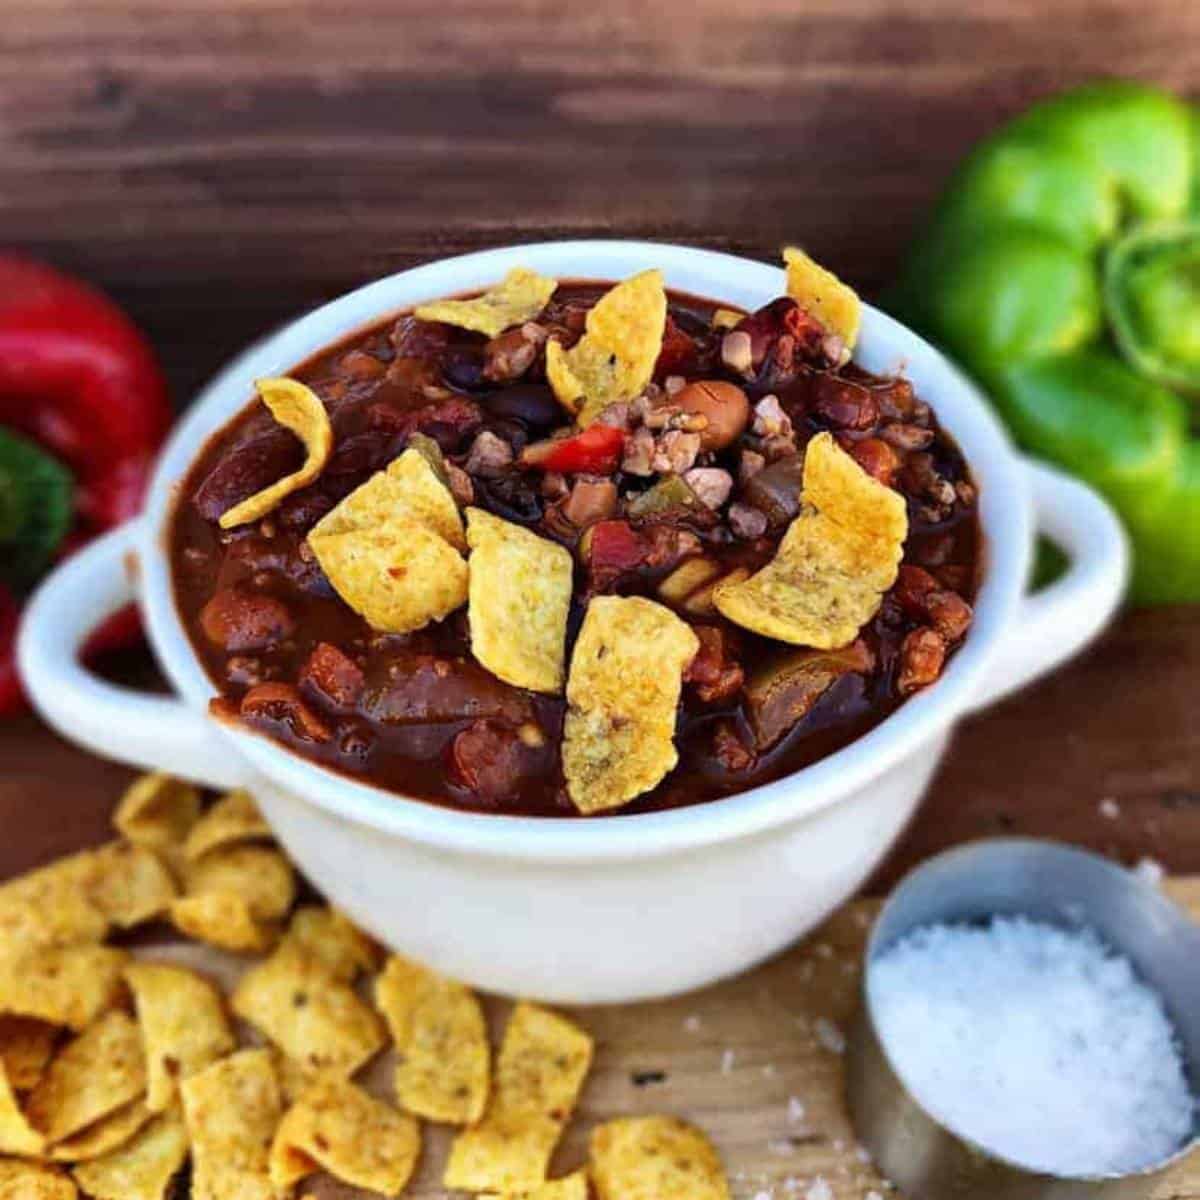 veggie chili topped with corn chips and walnuts